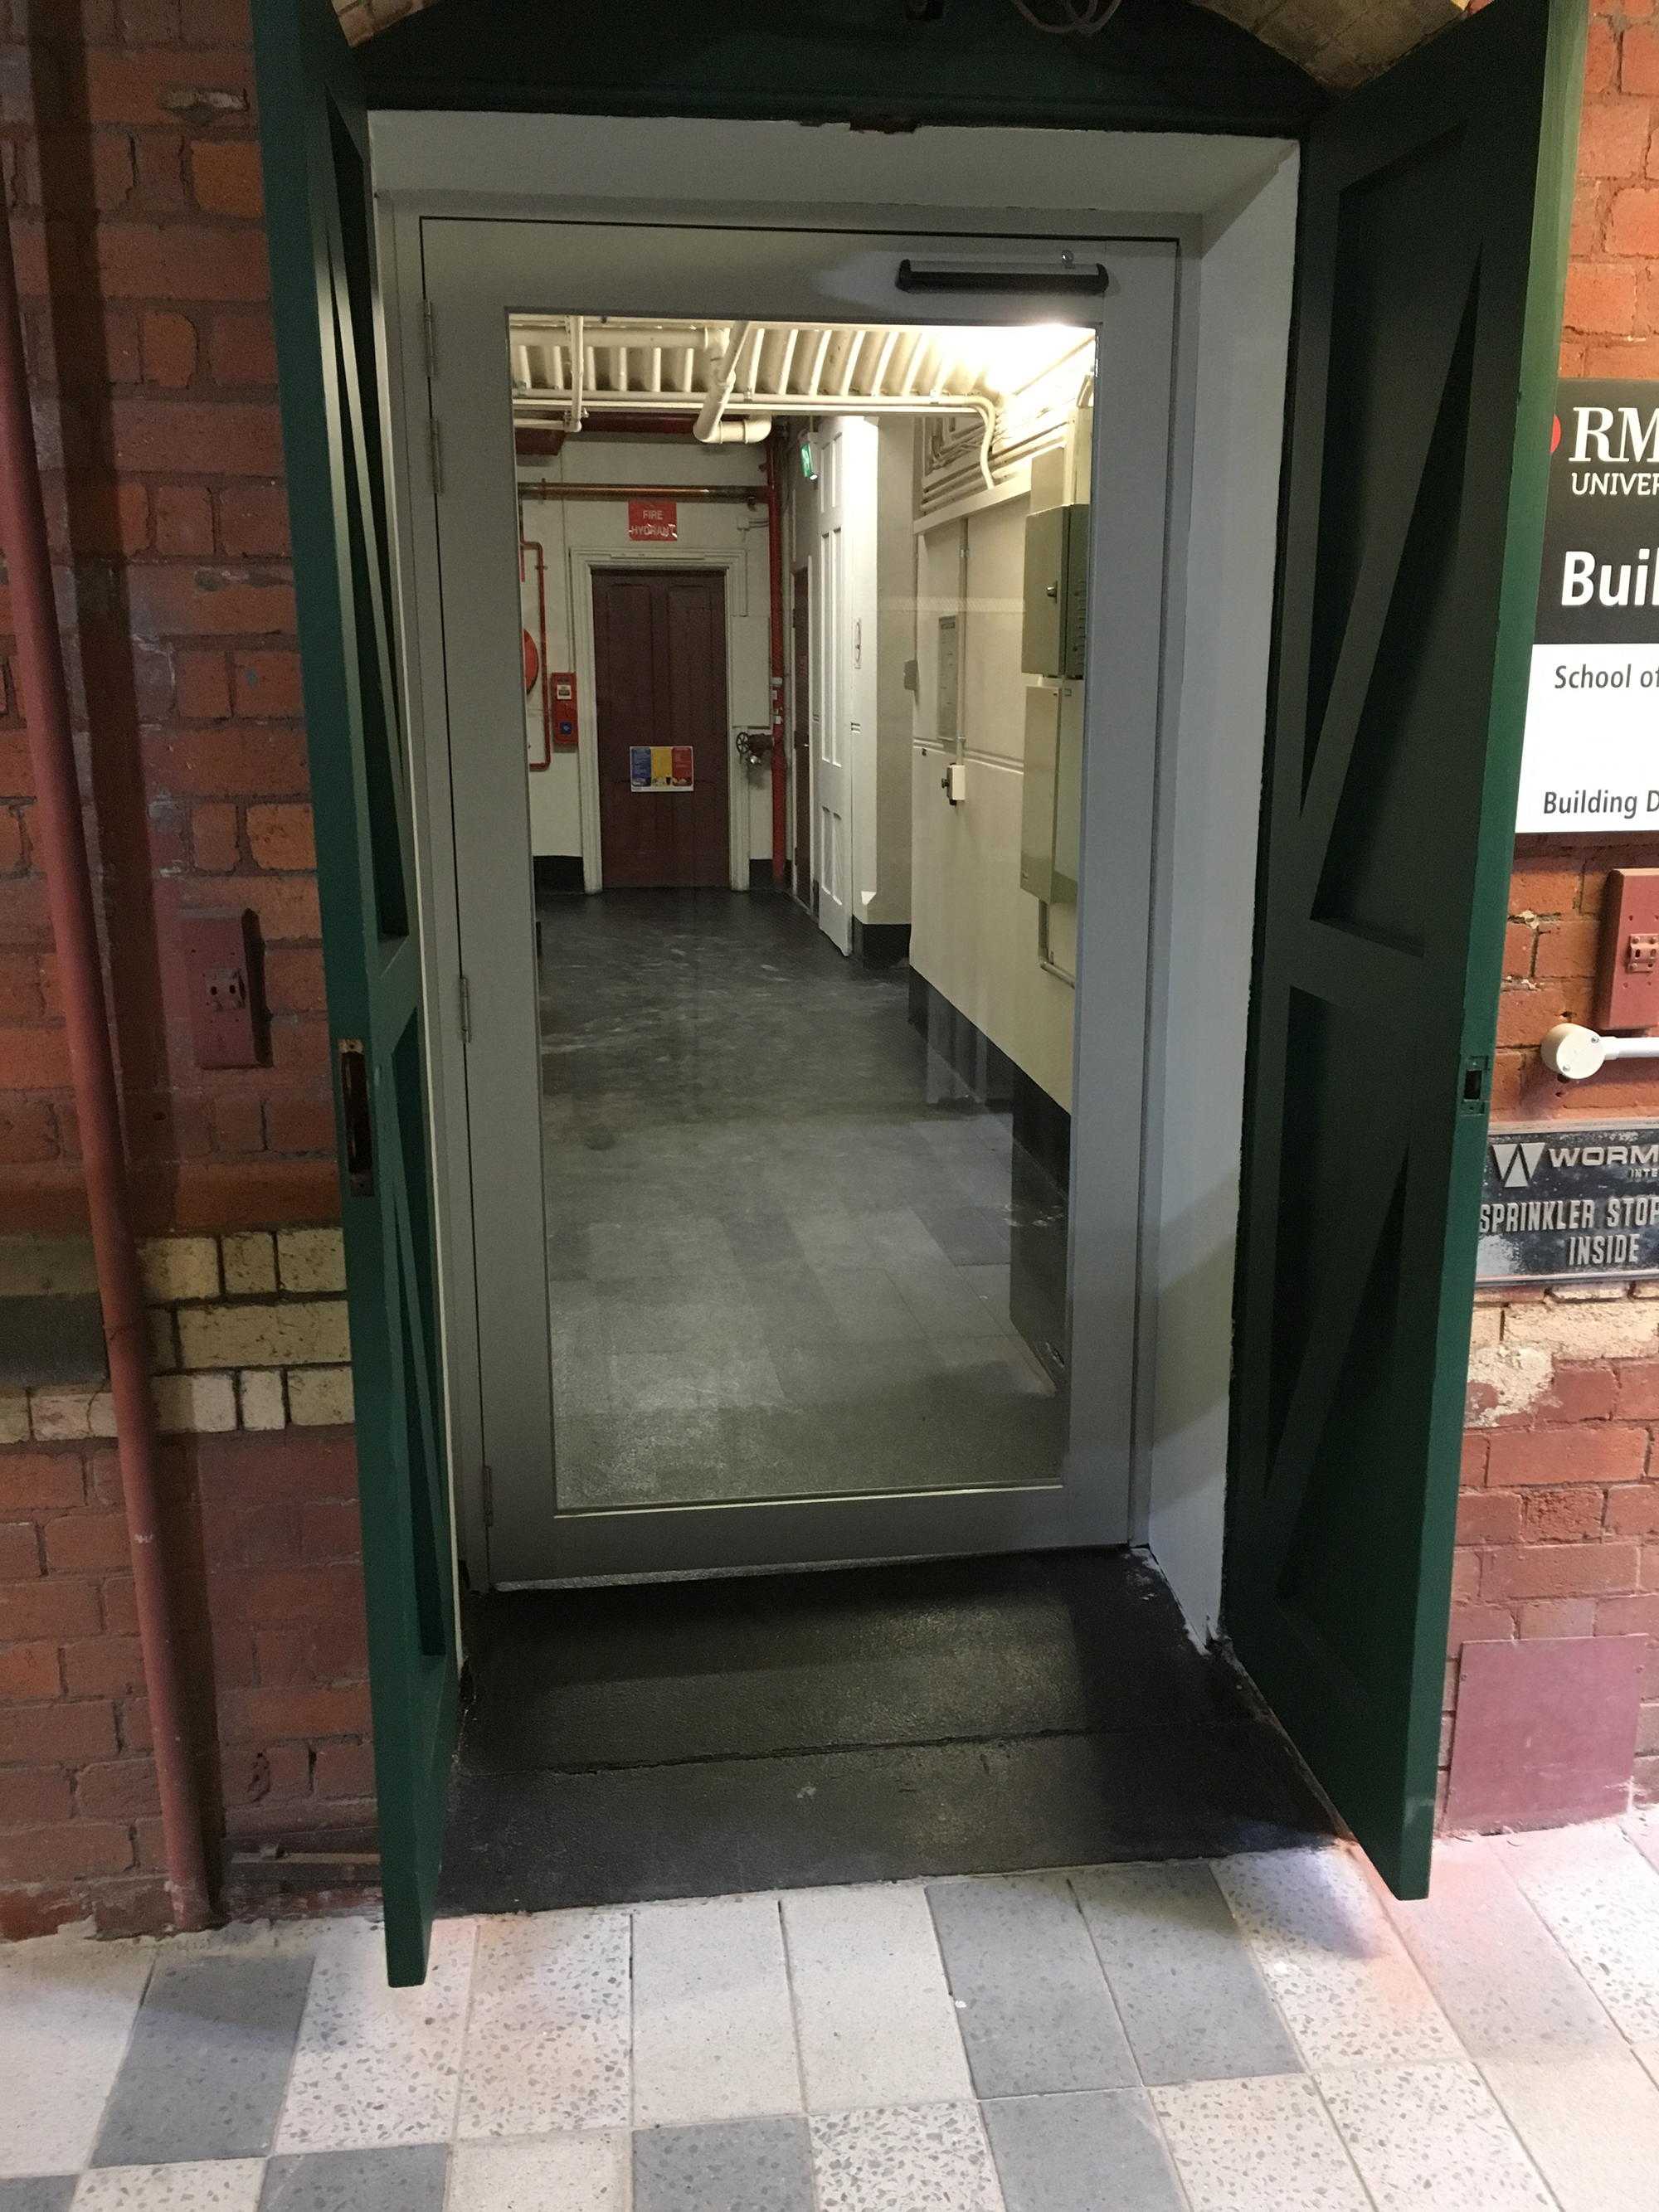 The door to Building 4 after the project upgrade